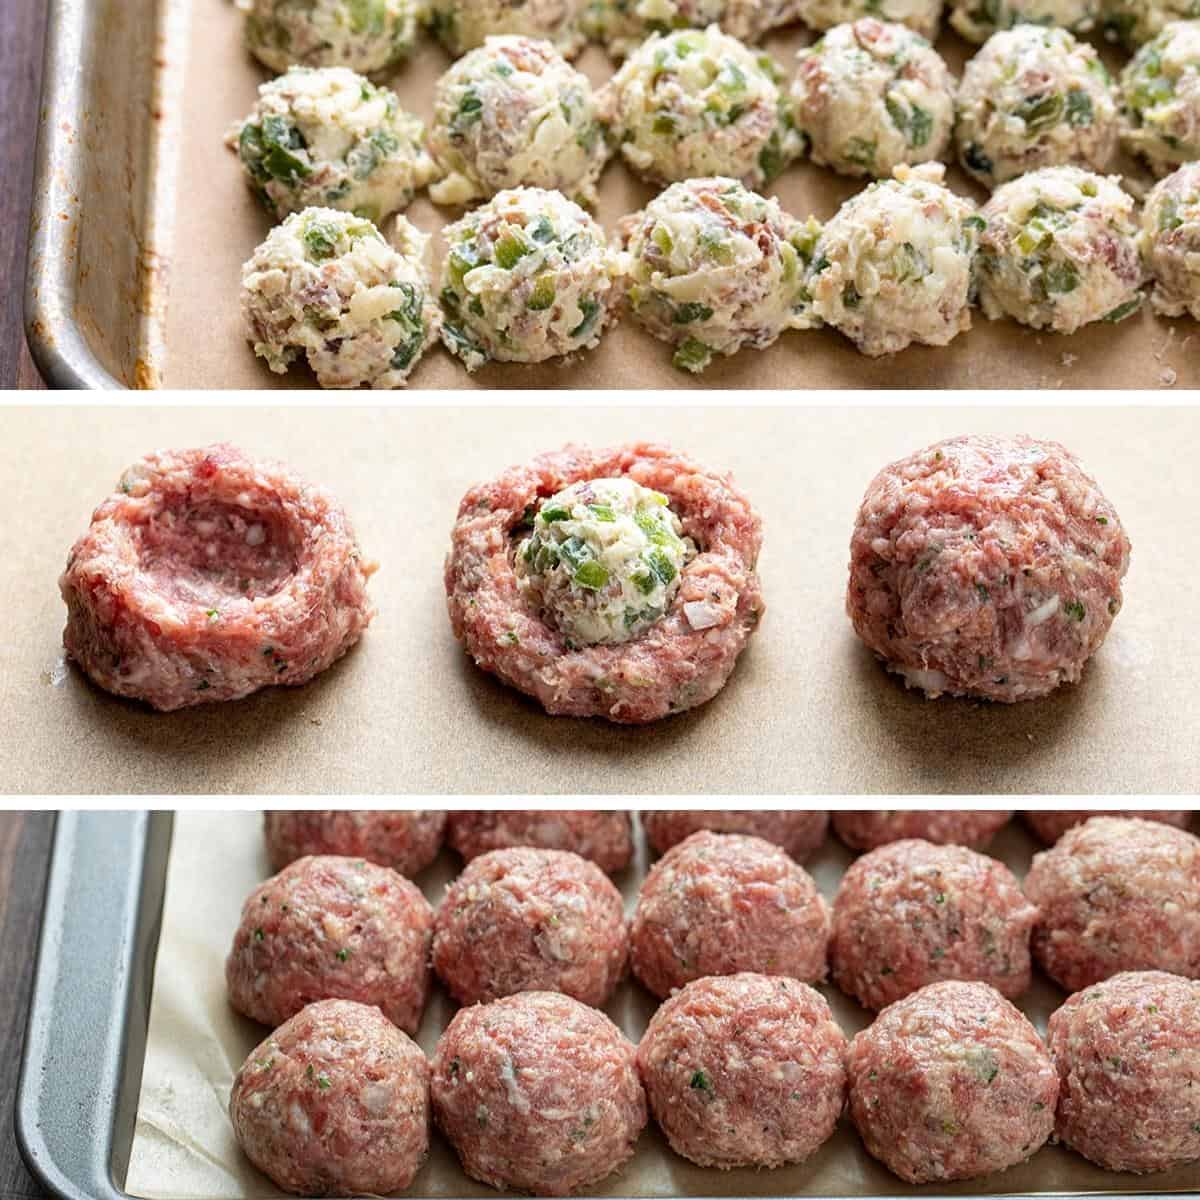 Process for filling, stuffing, and forming Jalapeno Popper Stuffed Meatballs